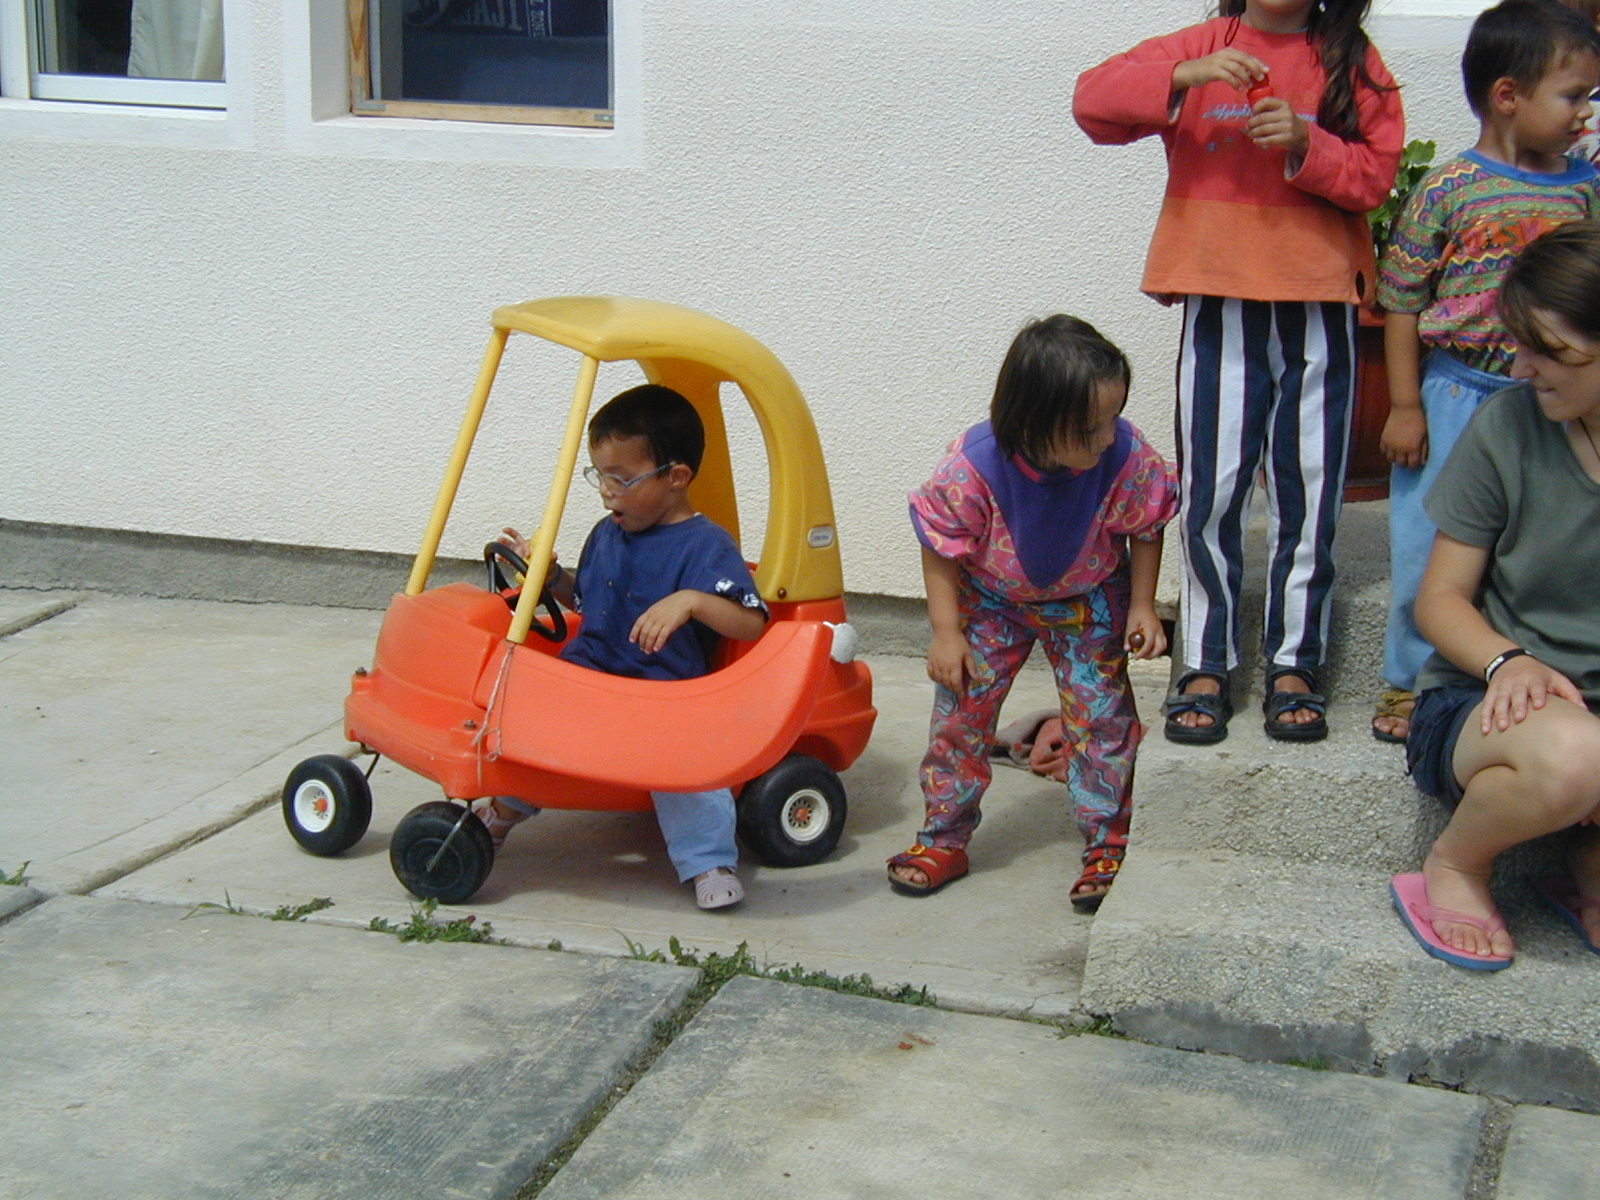 Driving lessons at the orphanage in Bistritia.